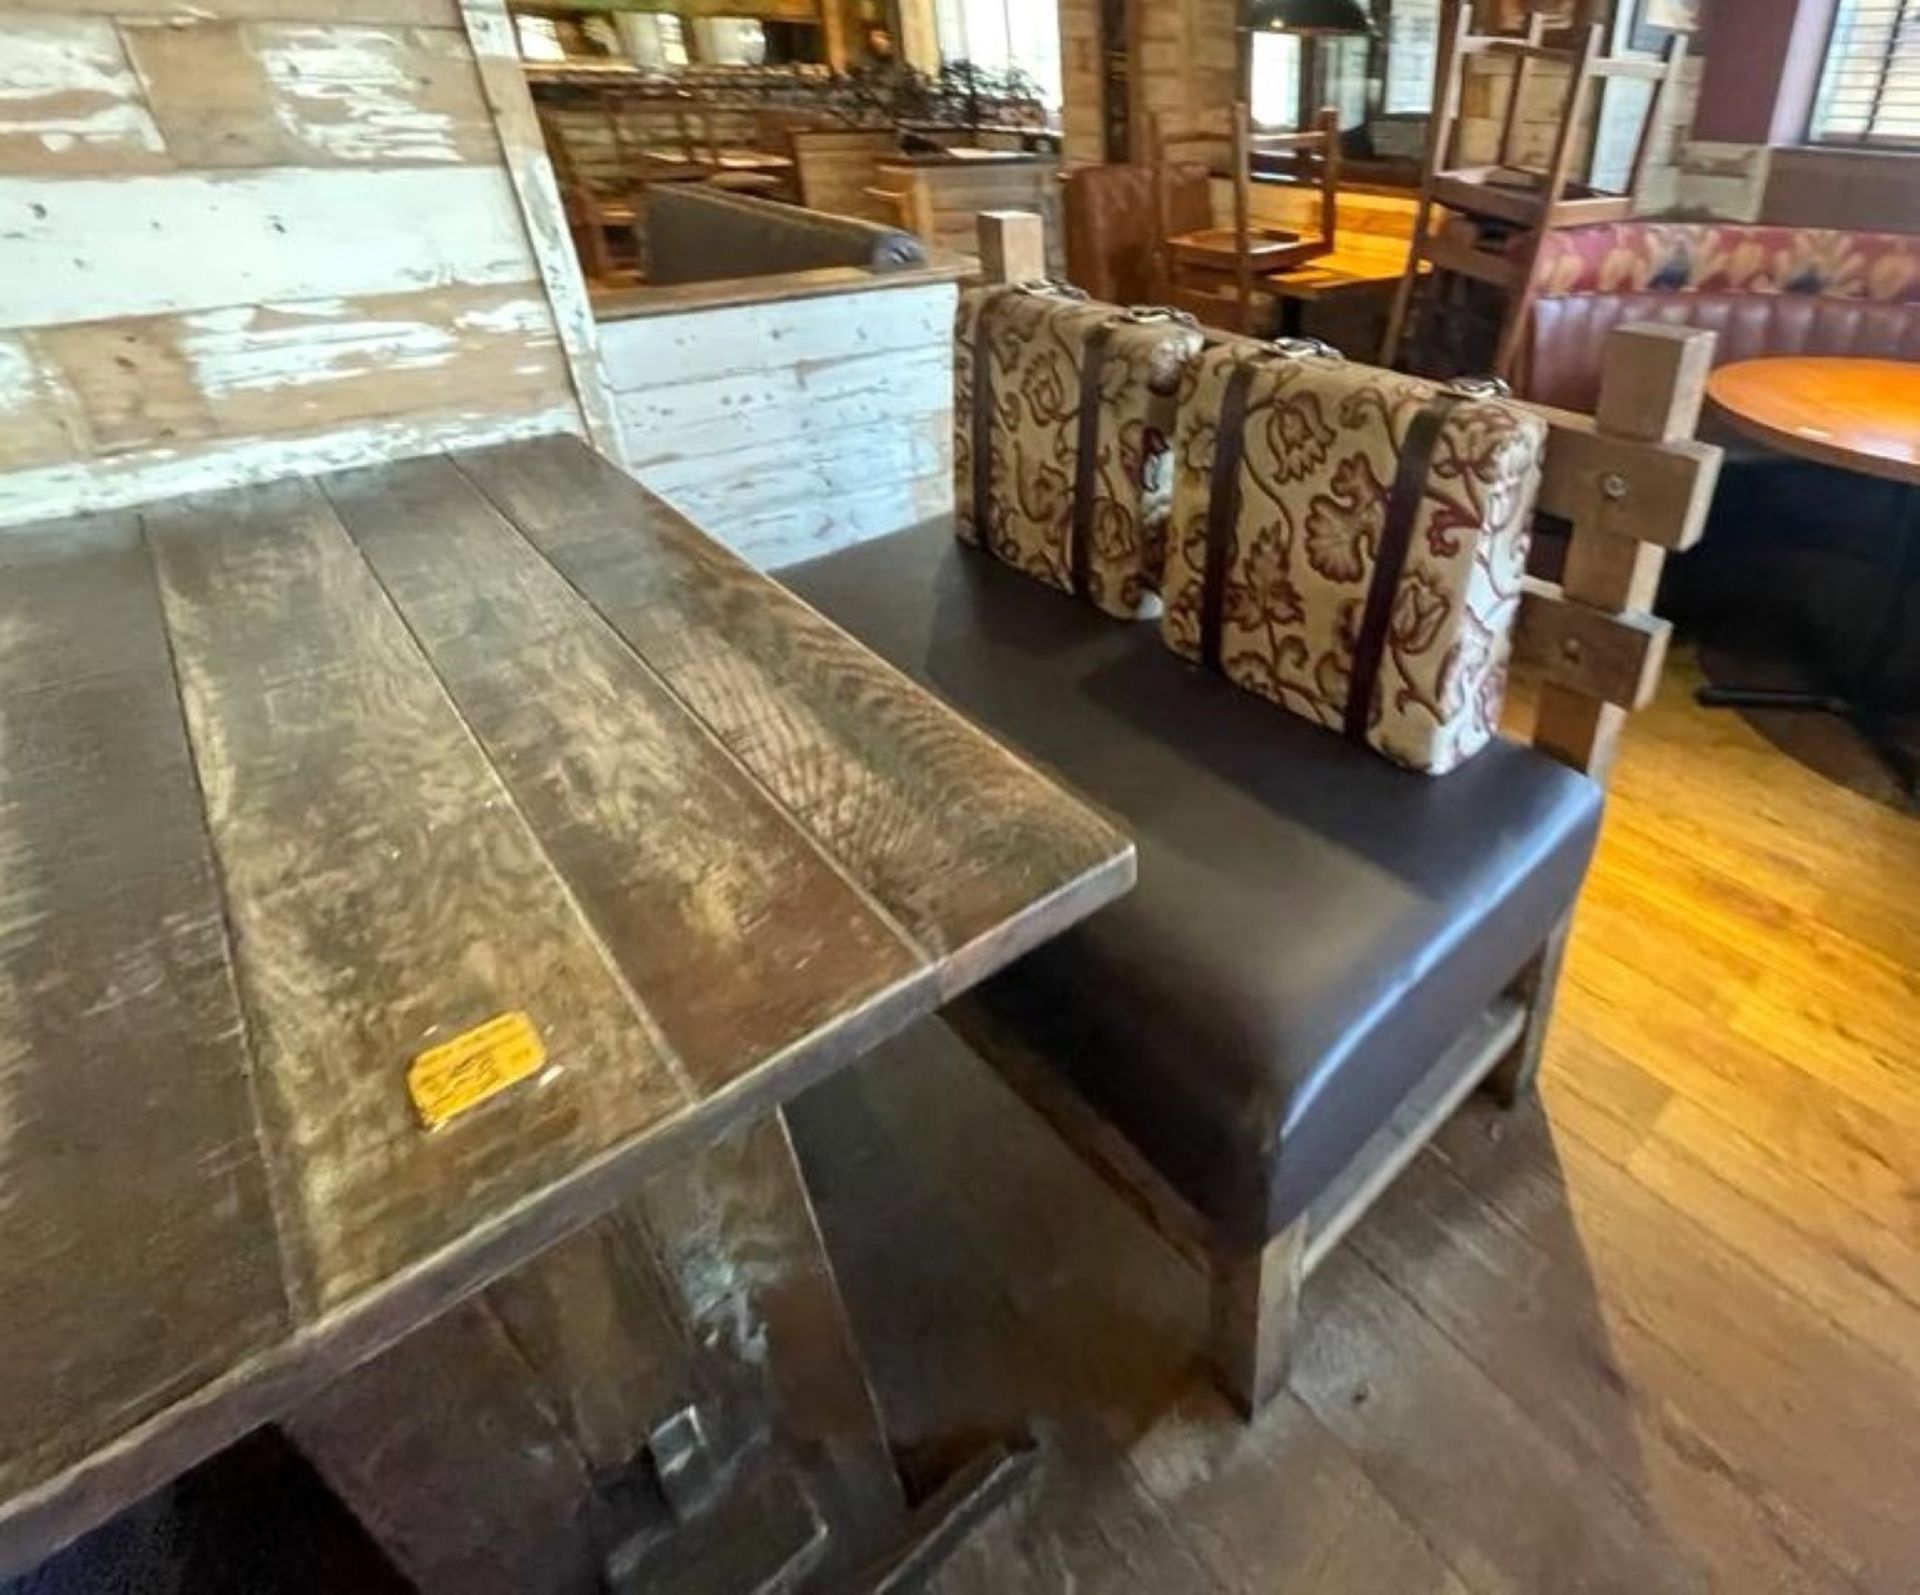 2 x Handcrafted Solid Wood Seating Benches With a Rustic Farmhouse Dining Table - Features Brown - Image 9 of 13